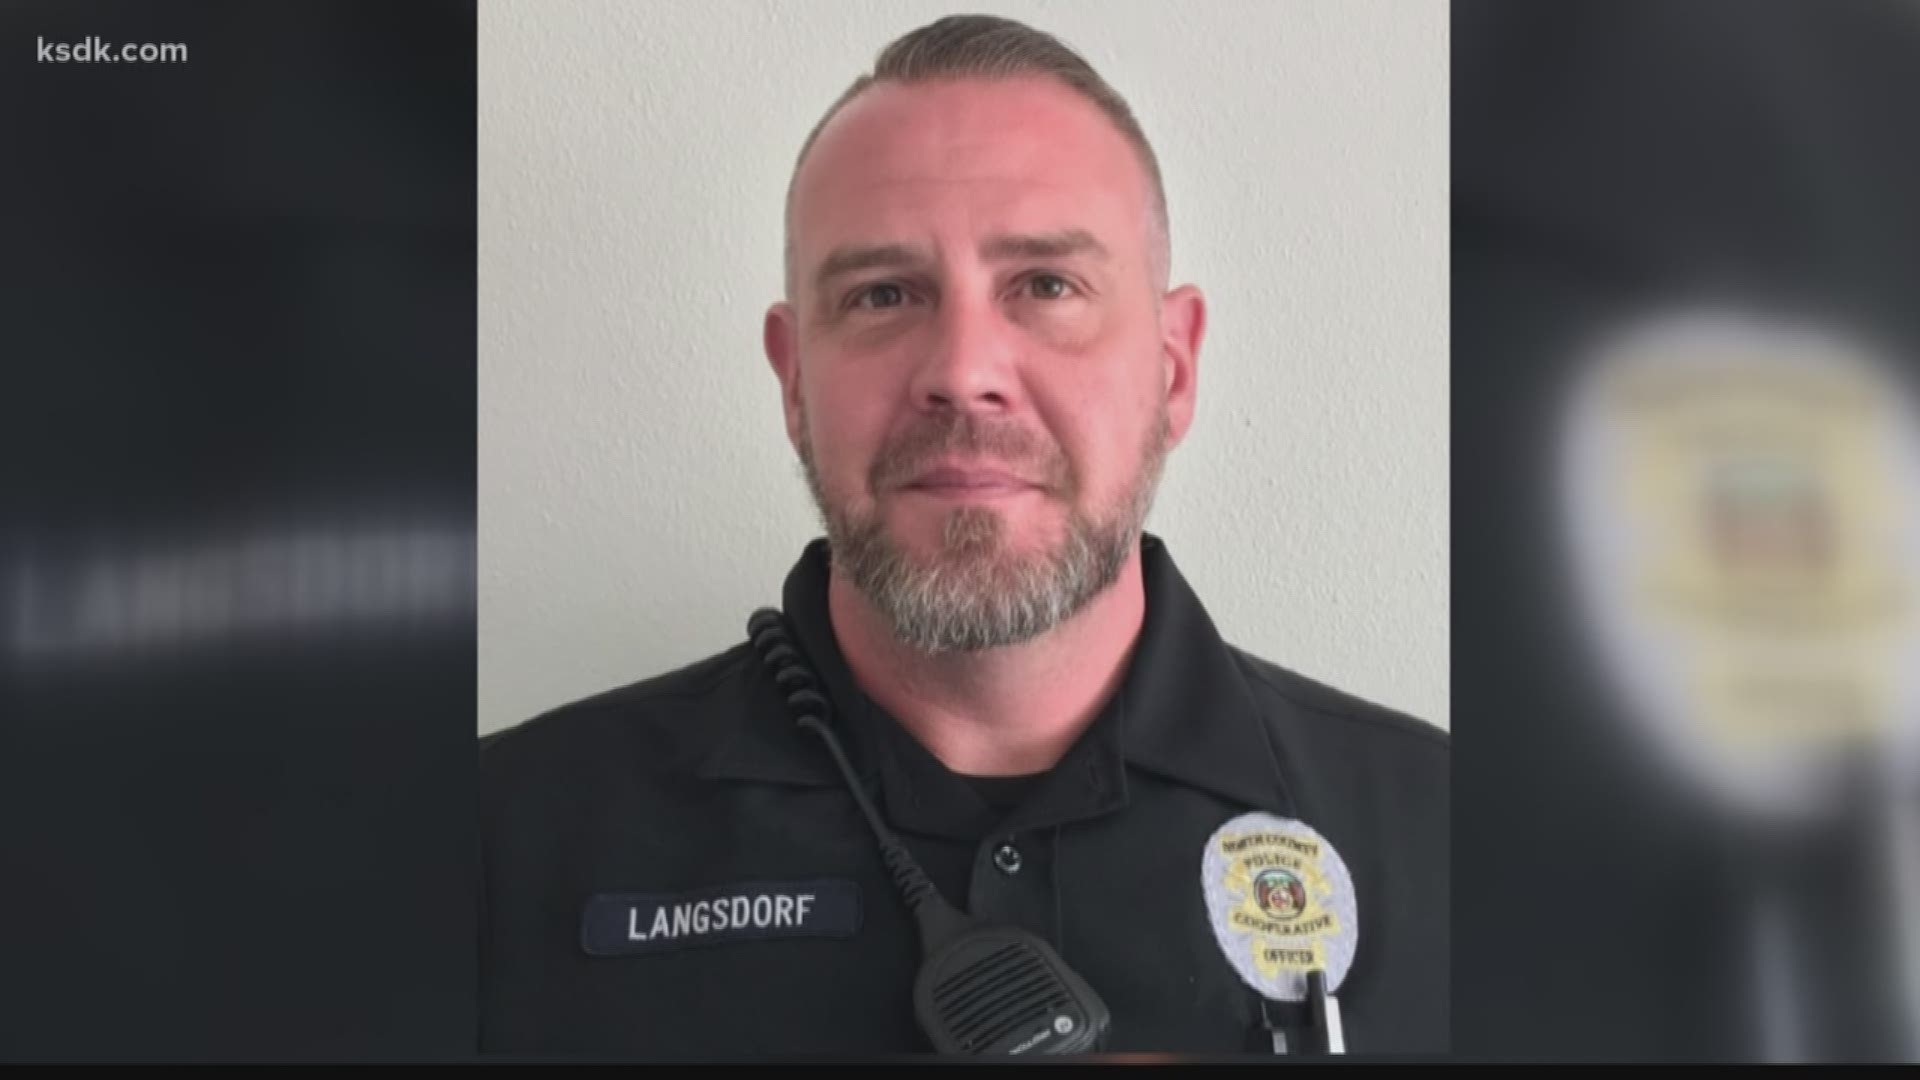 It comes a day after Officer Michael Langsdorf was murdered at the Wellston Food Market.